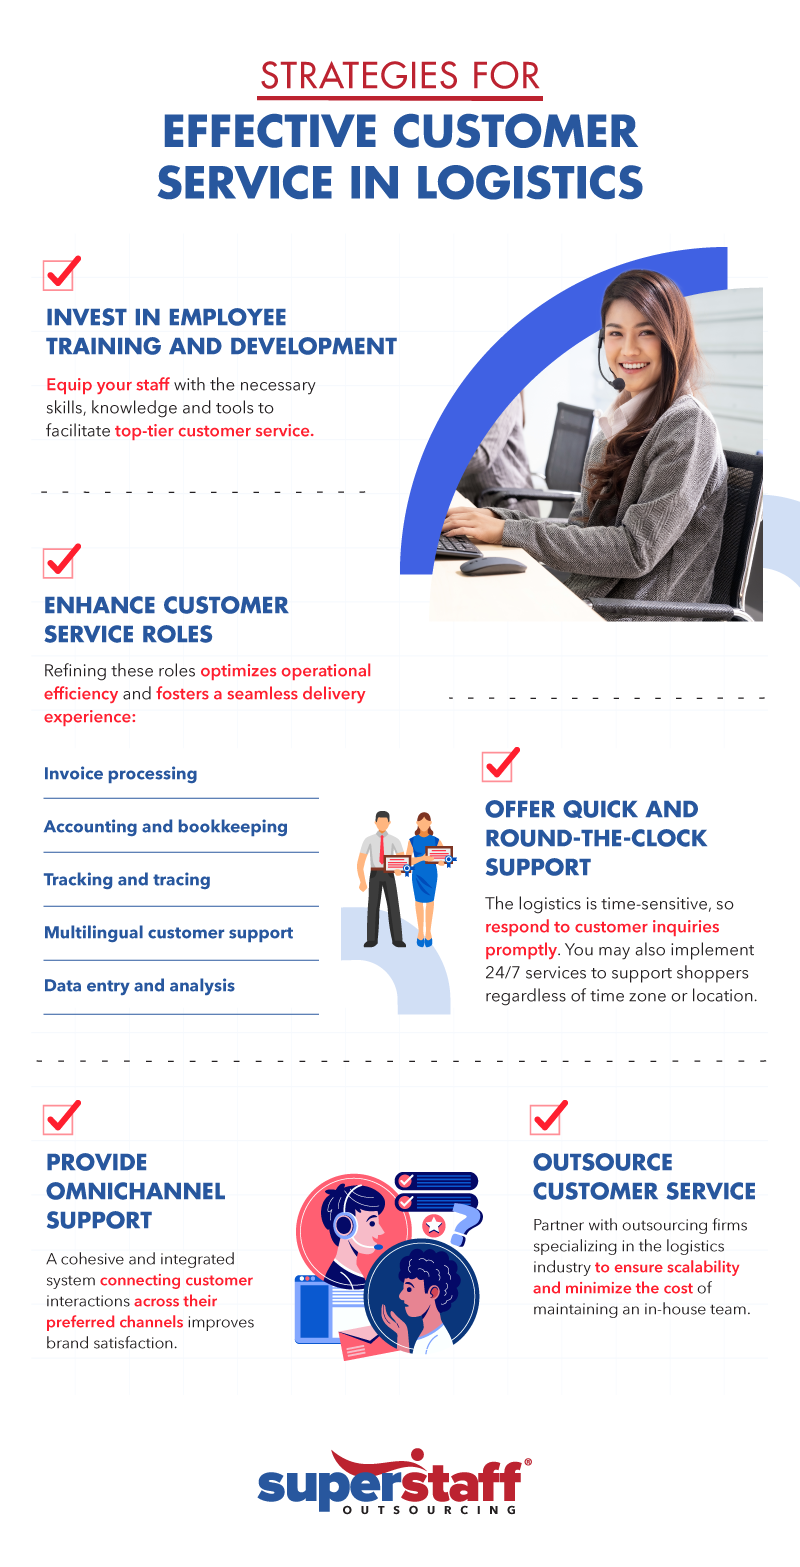 Strategies for Effective Customer Service in Logistics 